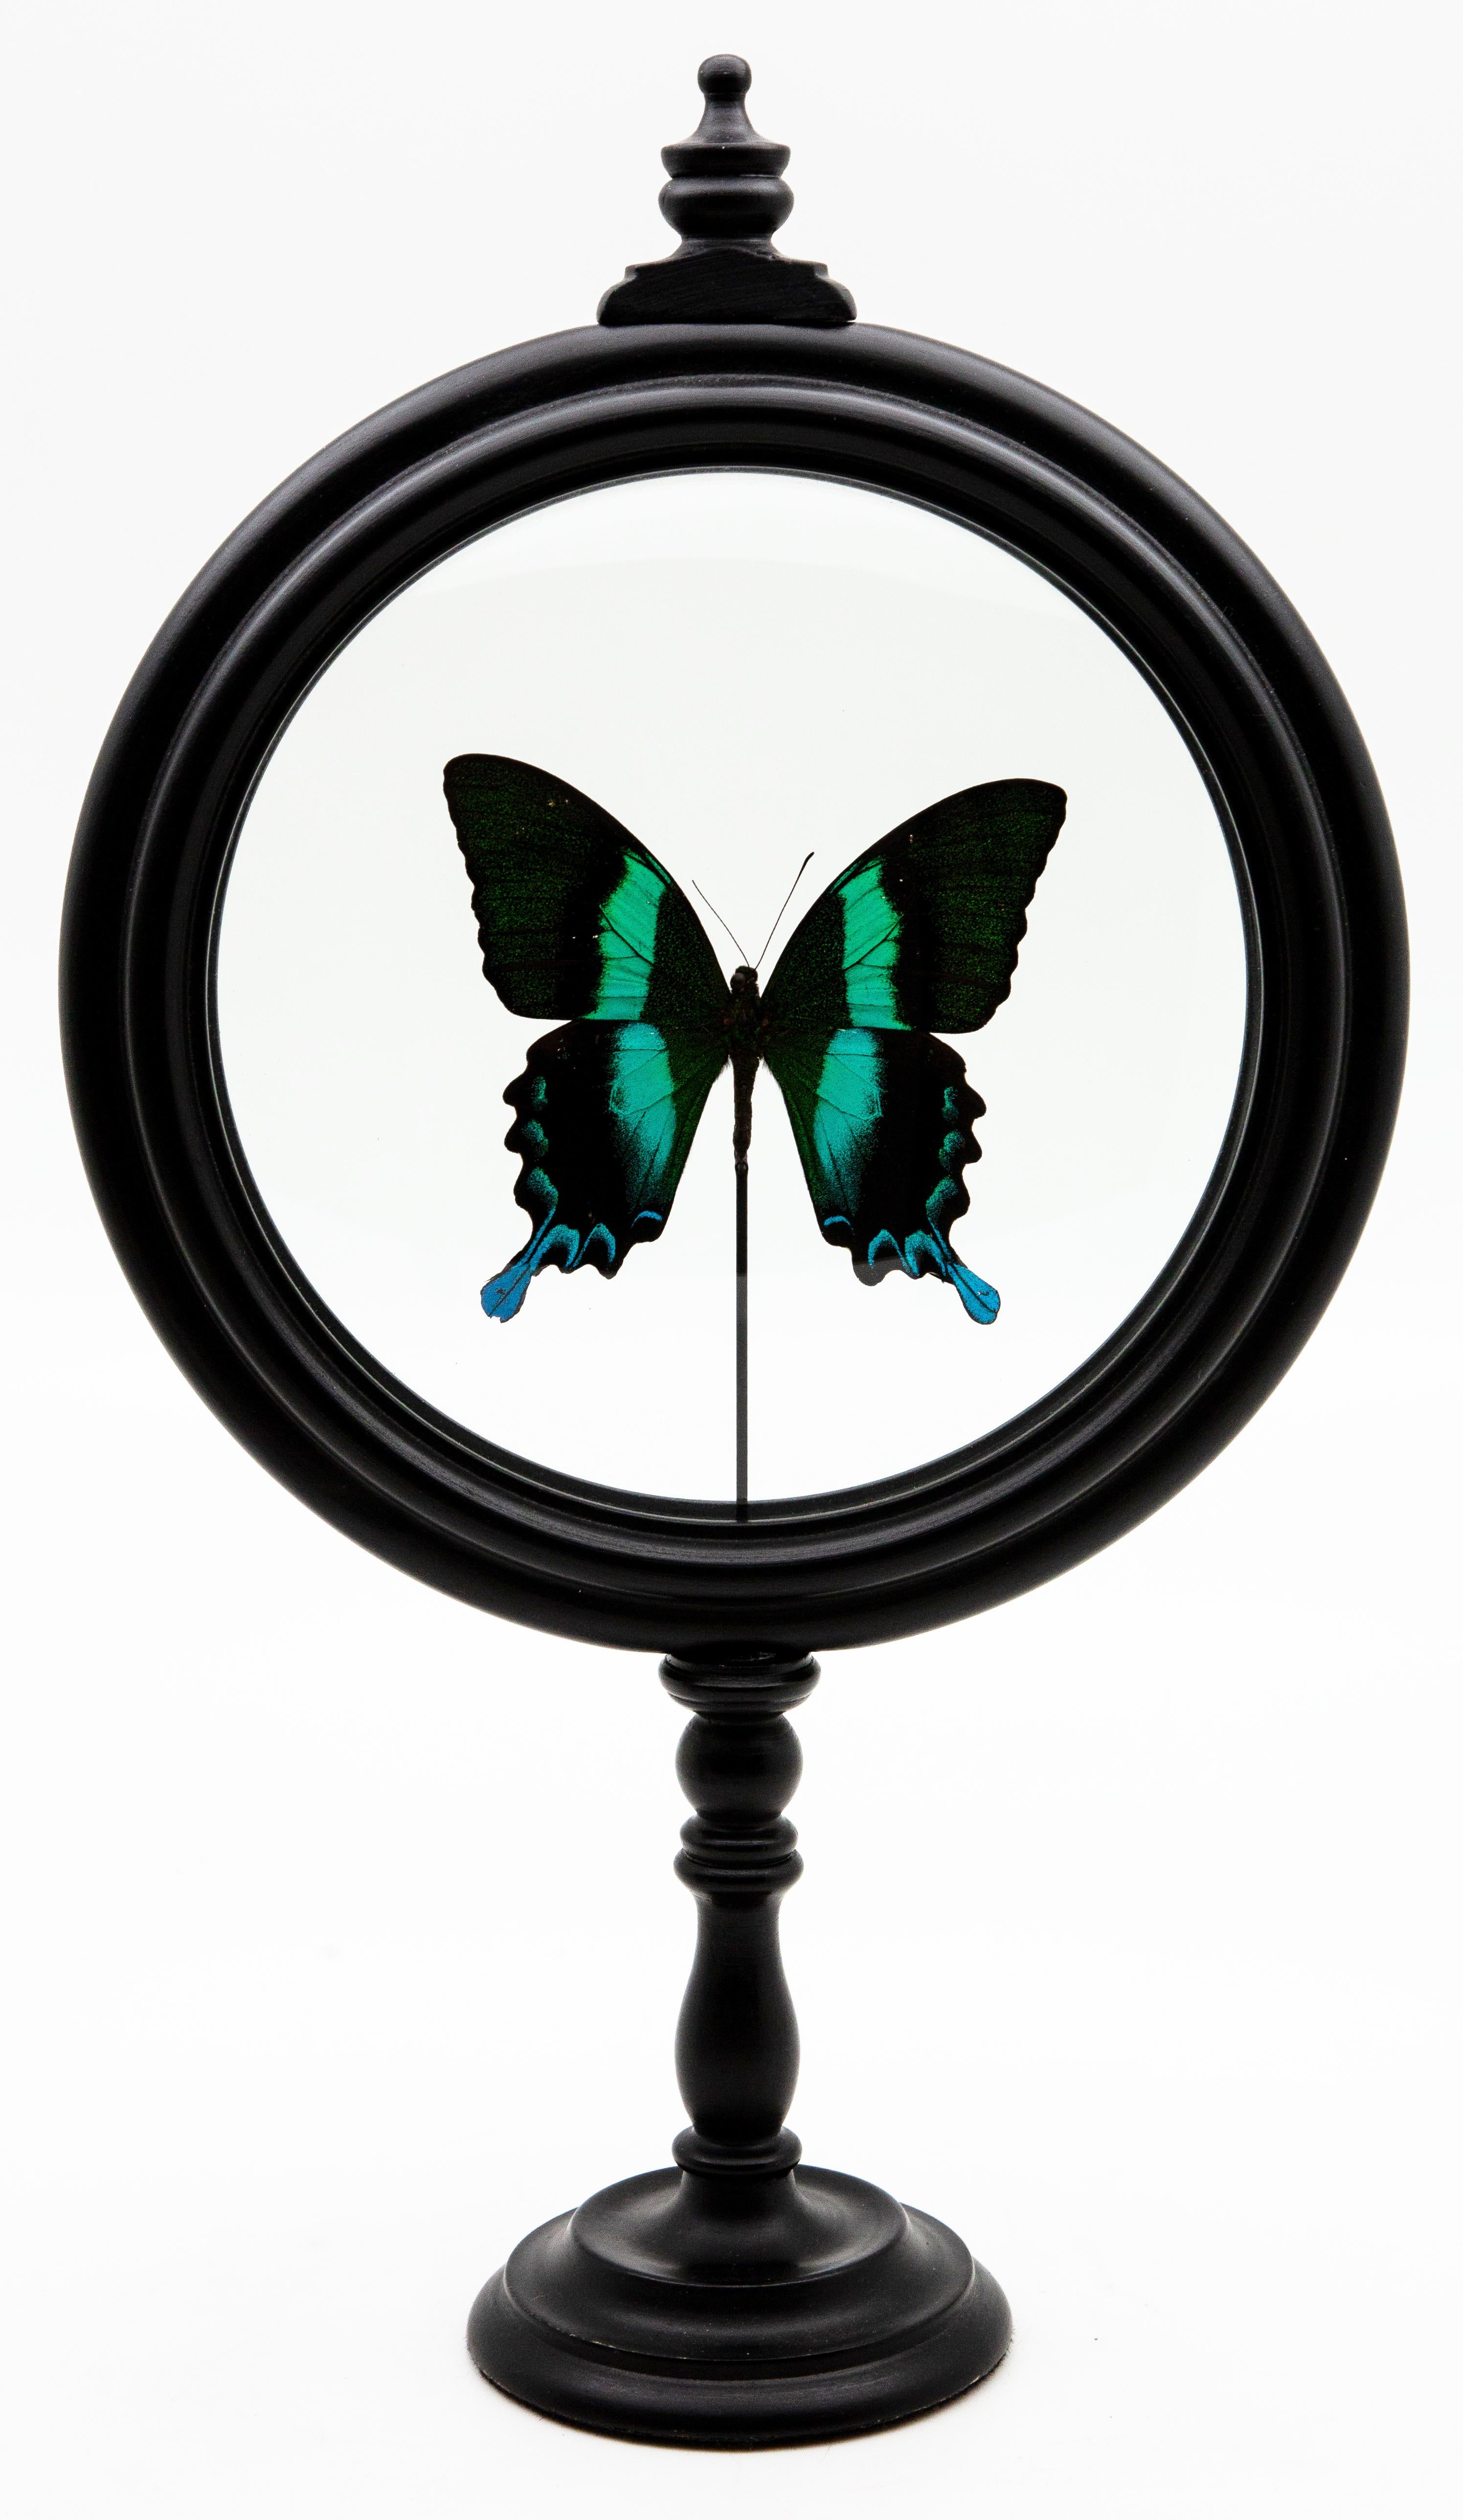 Green butterfly in round reliquary. Papilio Blumei butterfly mounted in France. Turned wood base with double glass. Papilio Blumei is a day time butterfly with a green color ending in blue on the tails. It is found in Borneo, Sulawesi, and Papua New